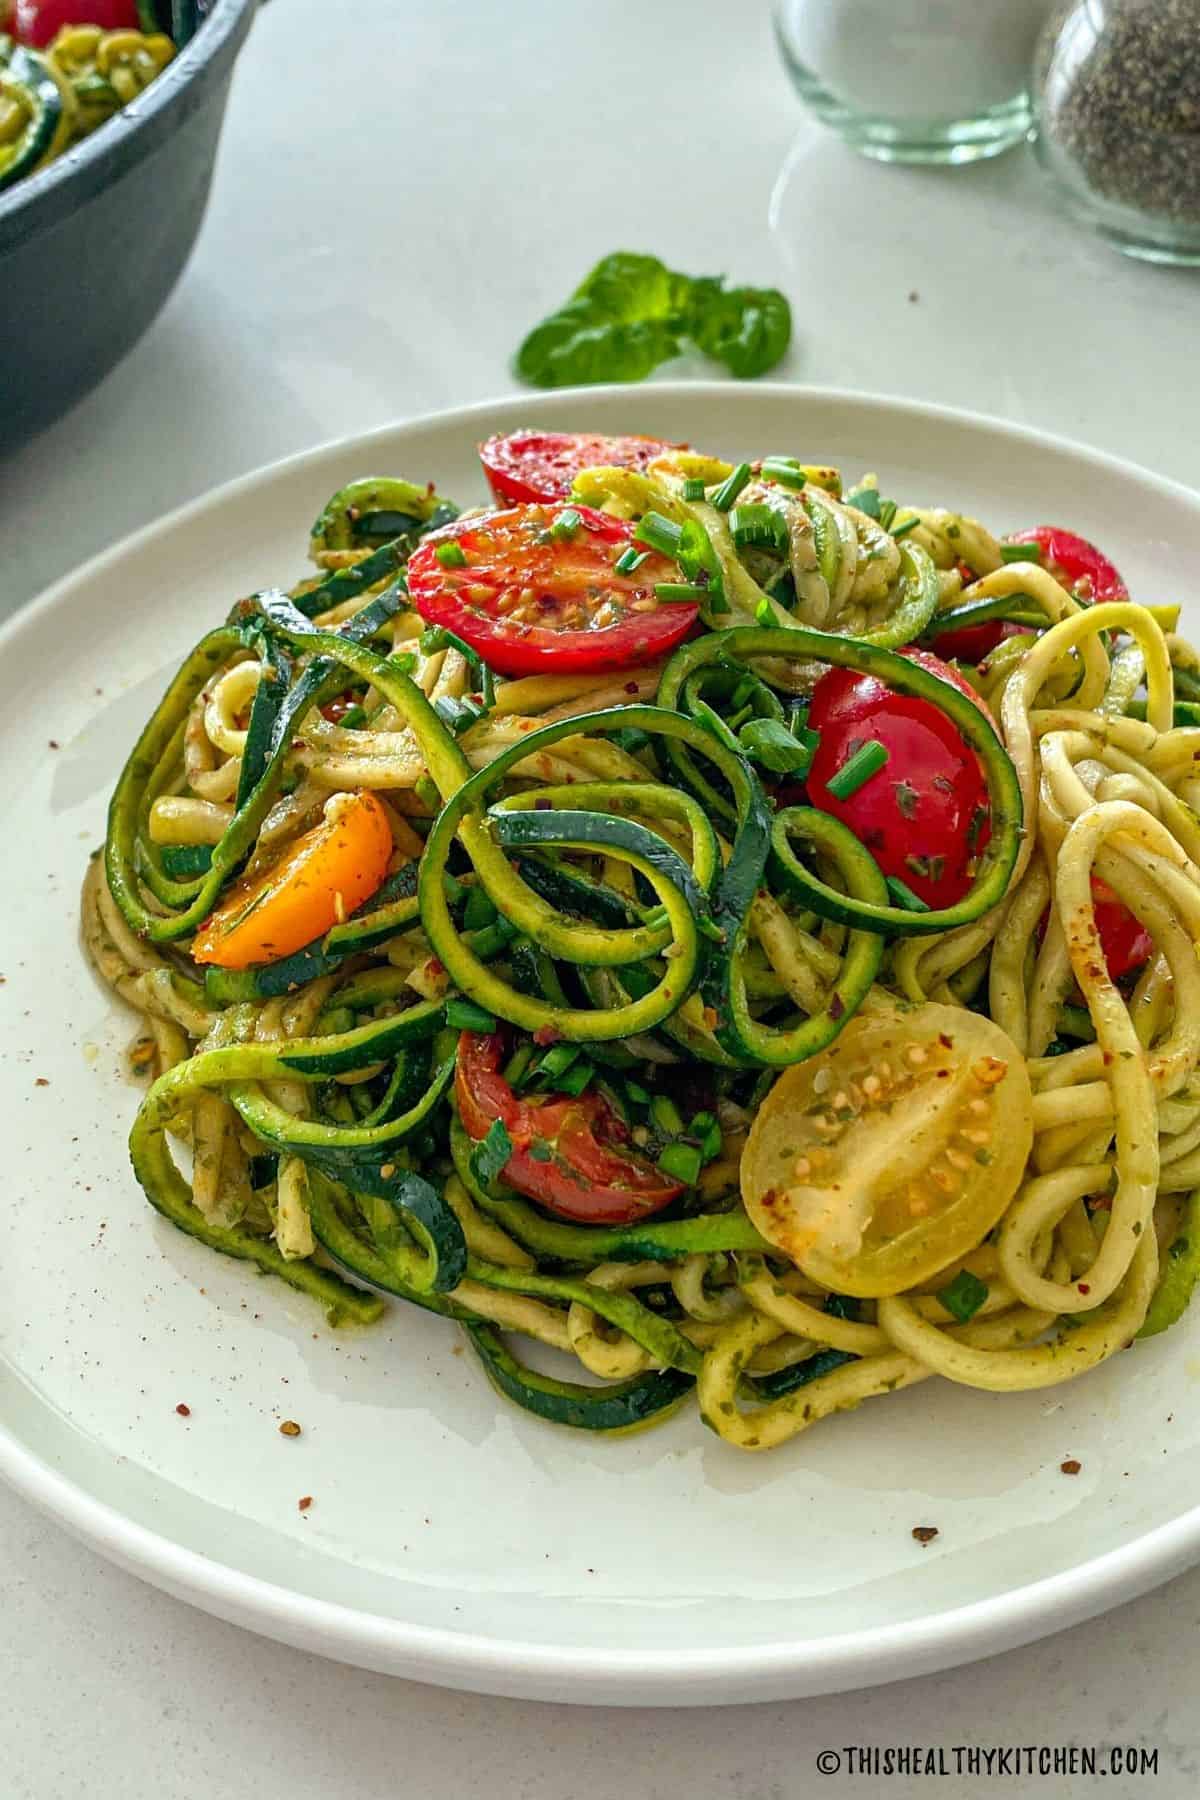 Side view of plate with spiralized zucchini noodles and cherry tomatoes.